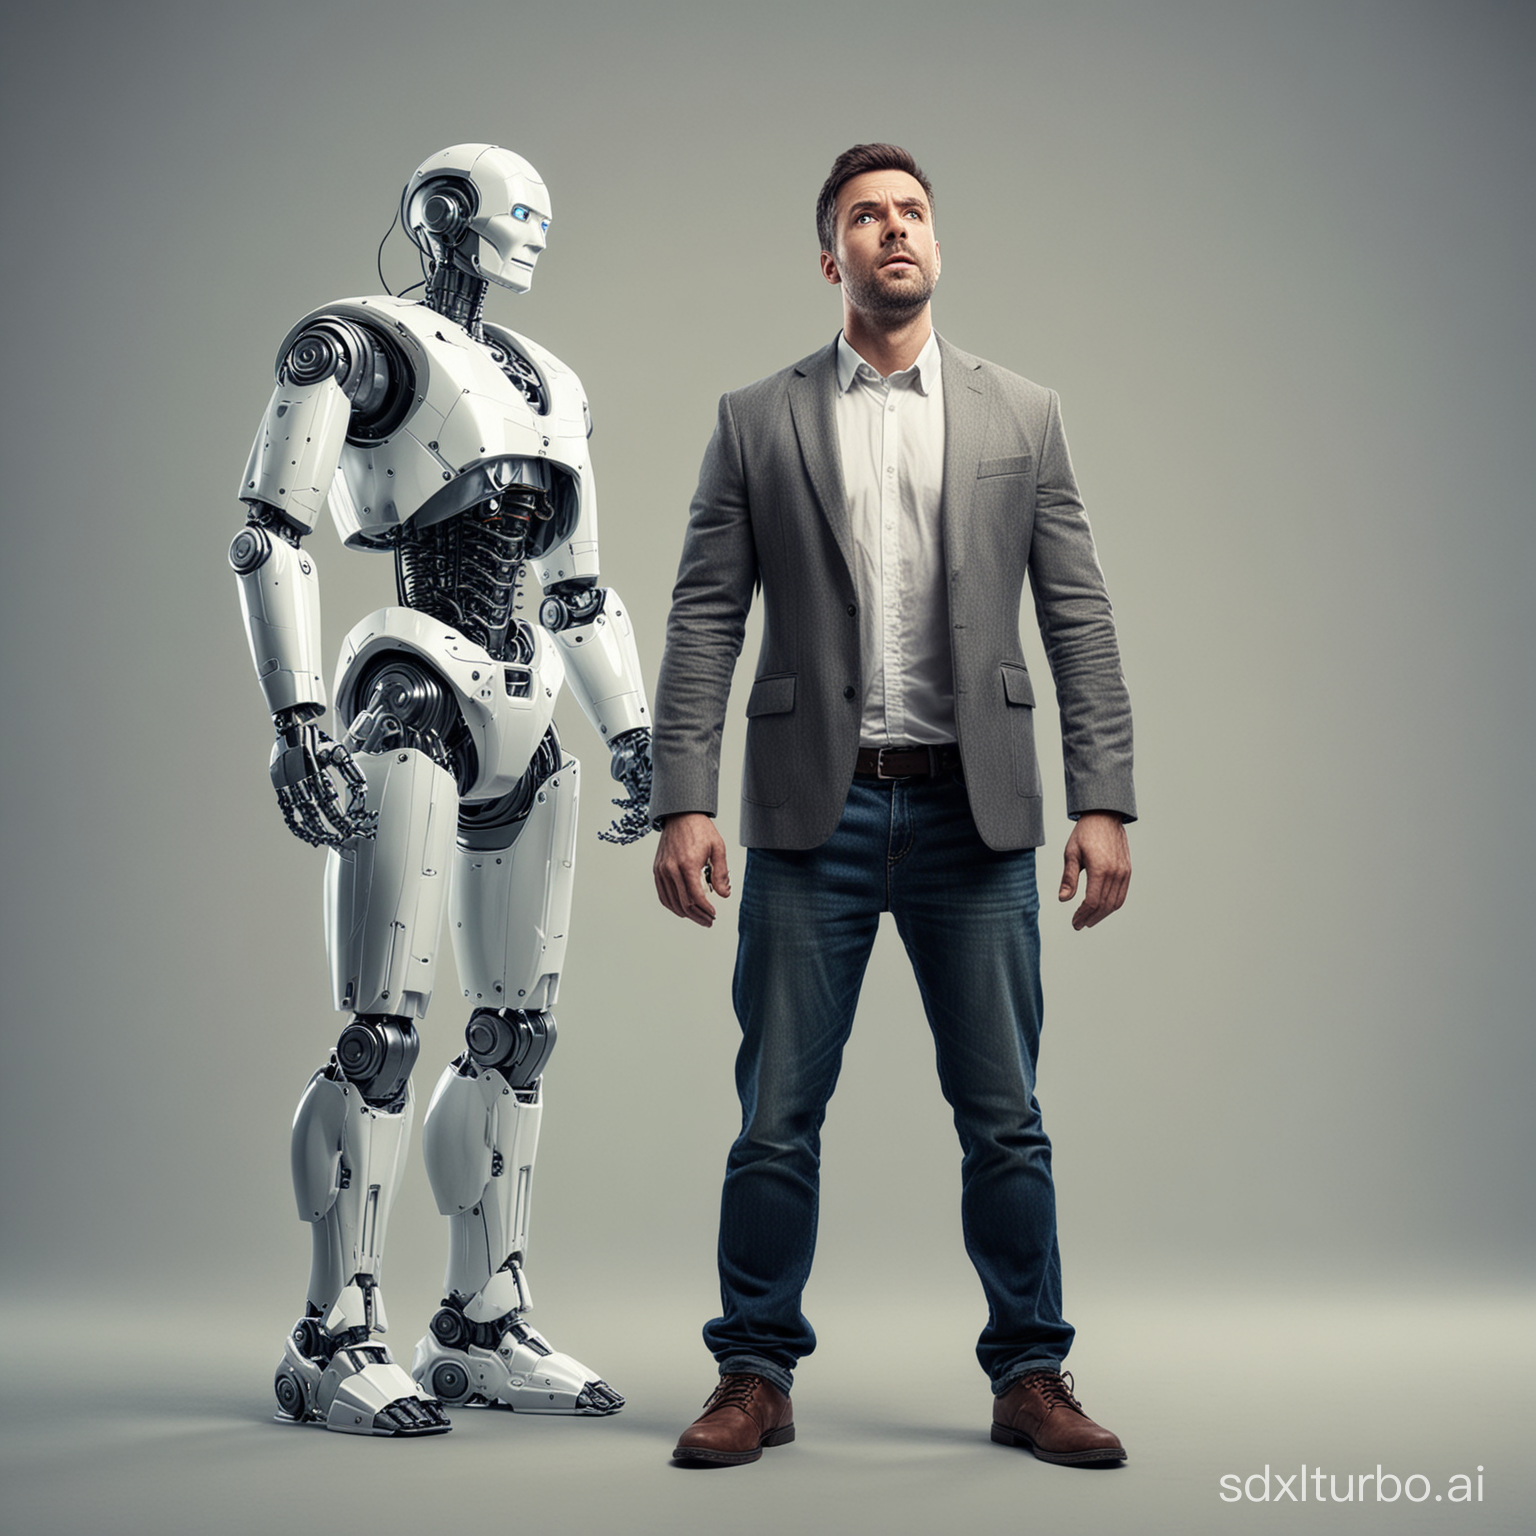 Frustrated man looking downwards, and a robot in a triumphant stance
